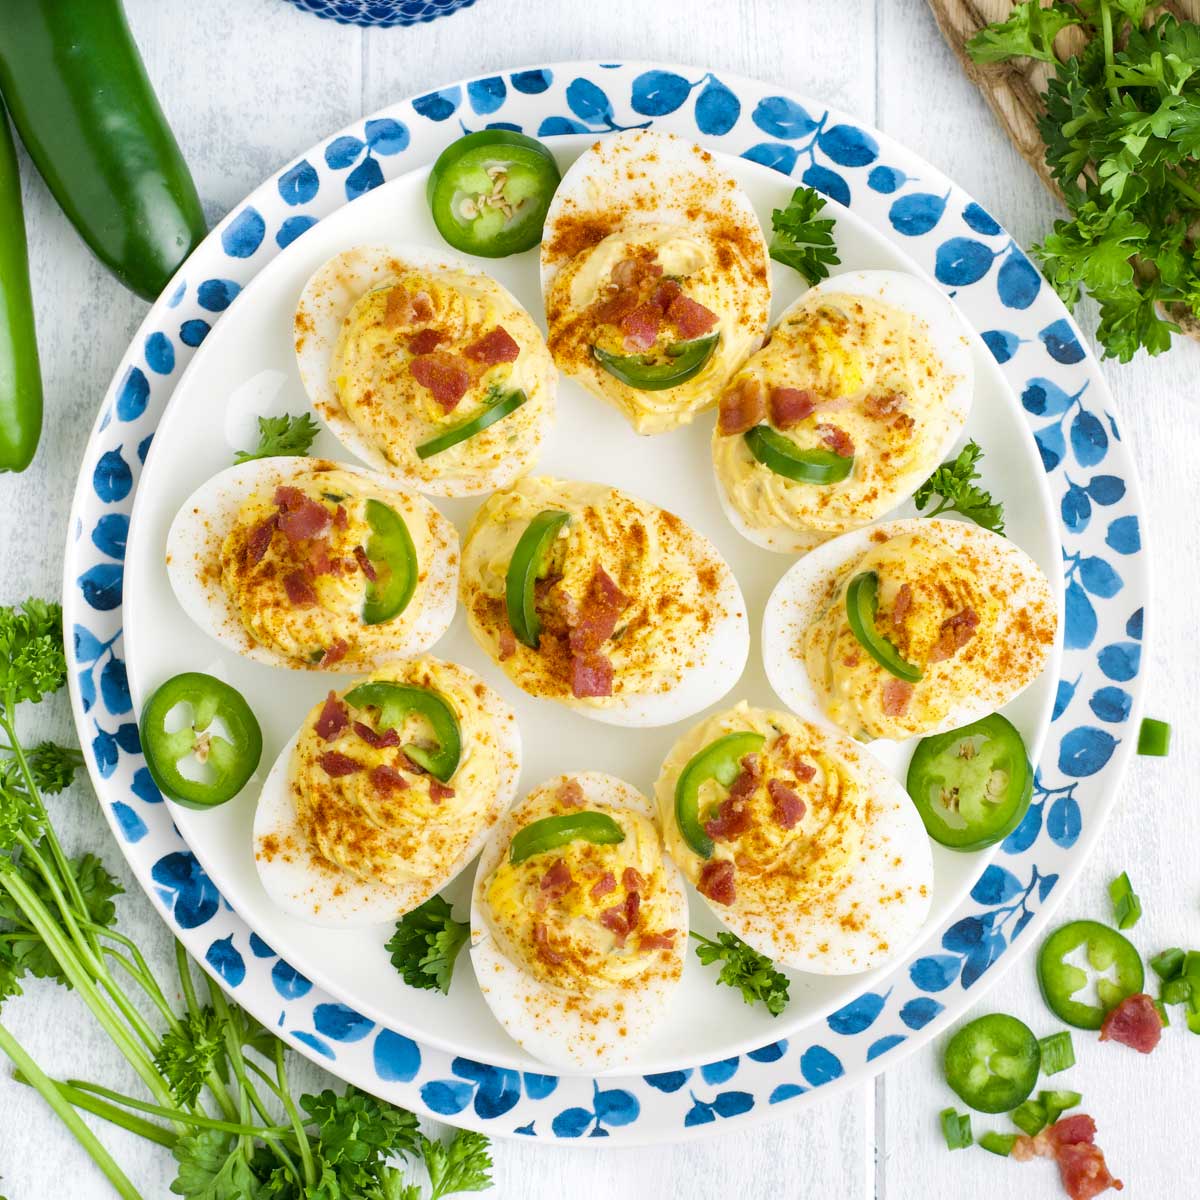 Spicy Deviled Eggs with Bacon and Jalapeno - Chili Pepper Madness